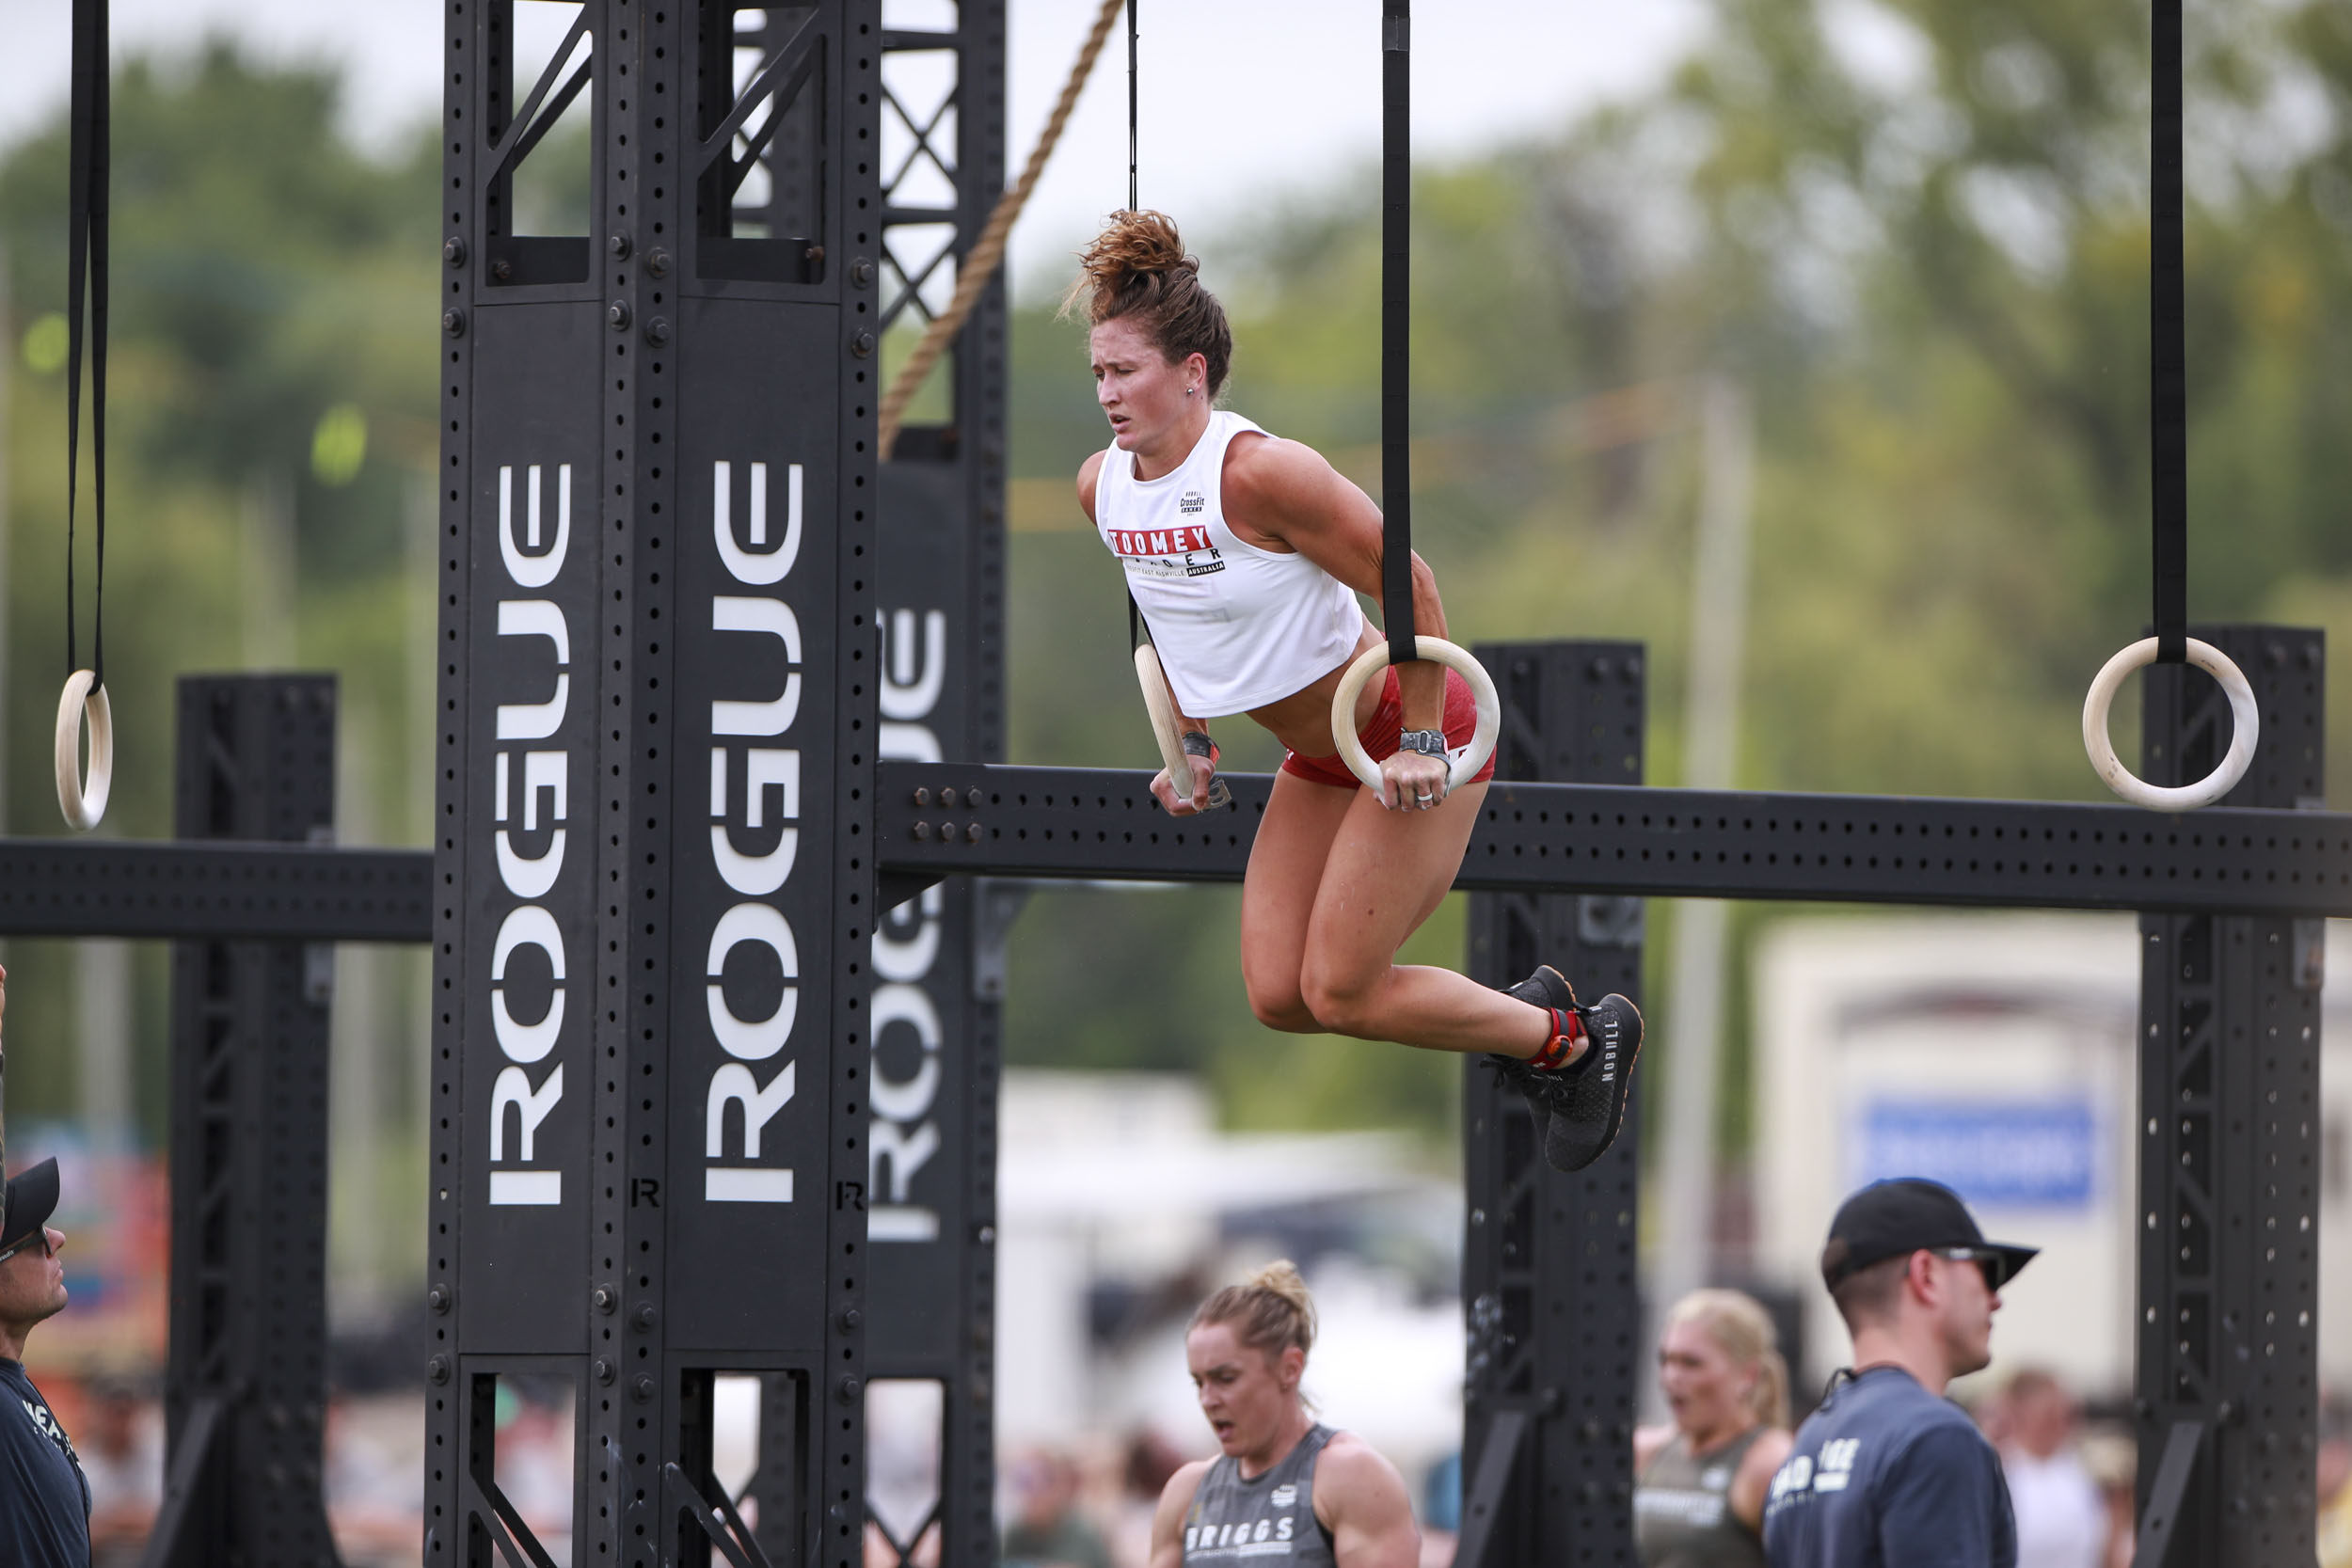 Tia-Clair Toomey is set to make history if she wins her sixth Fittest on Earth title. Photo: CrossFit Games